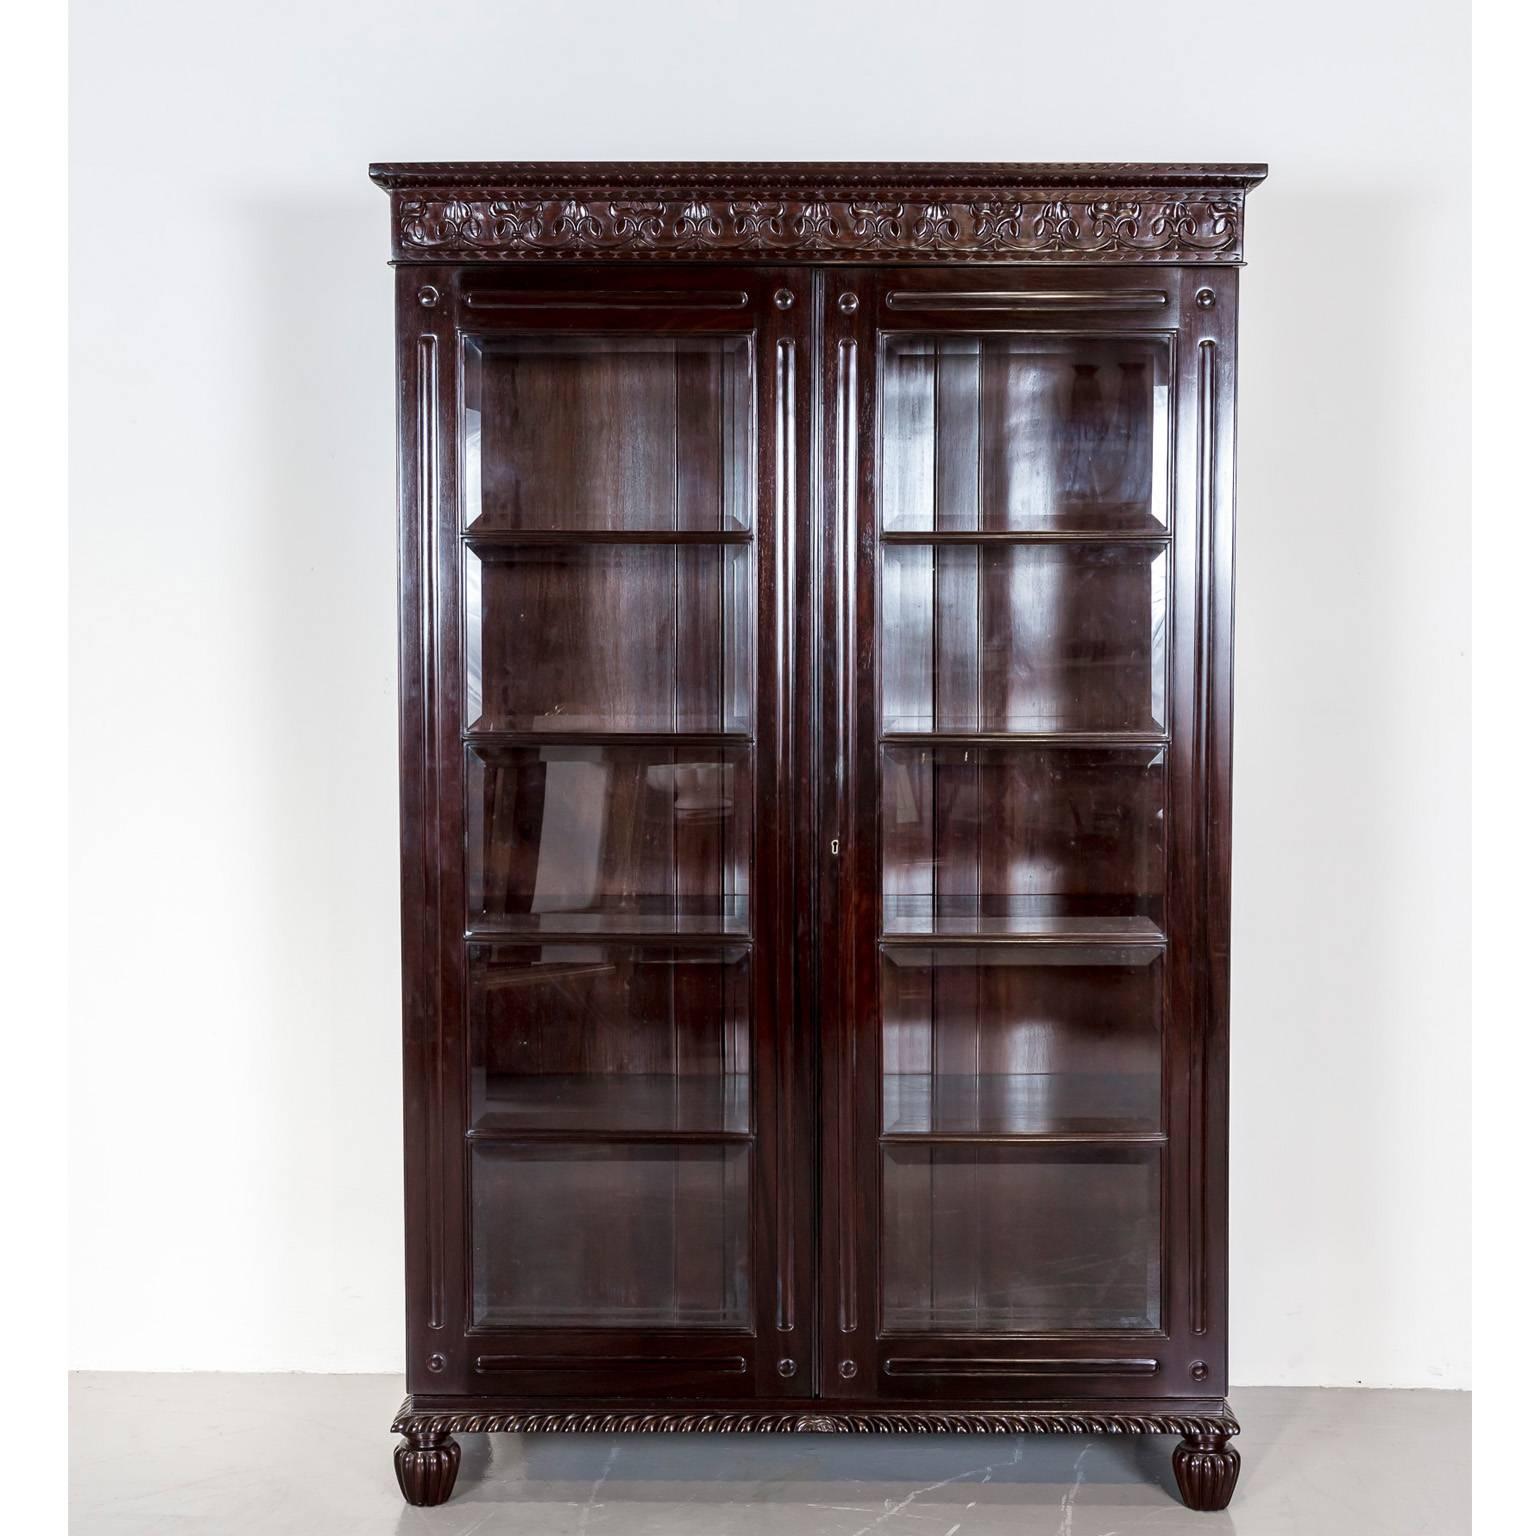 A British Colonial library bookcase in rosewood with a flat top, egg and dart carving on the edge and fleur- de- lis carving on the frieze. The frames of the double doors are carved with elongated reserves and each door has five bevelled glazed